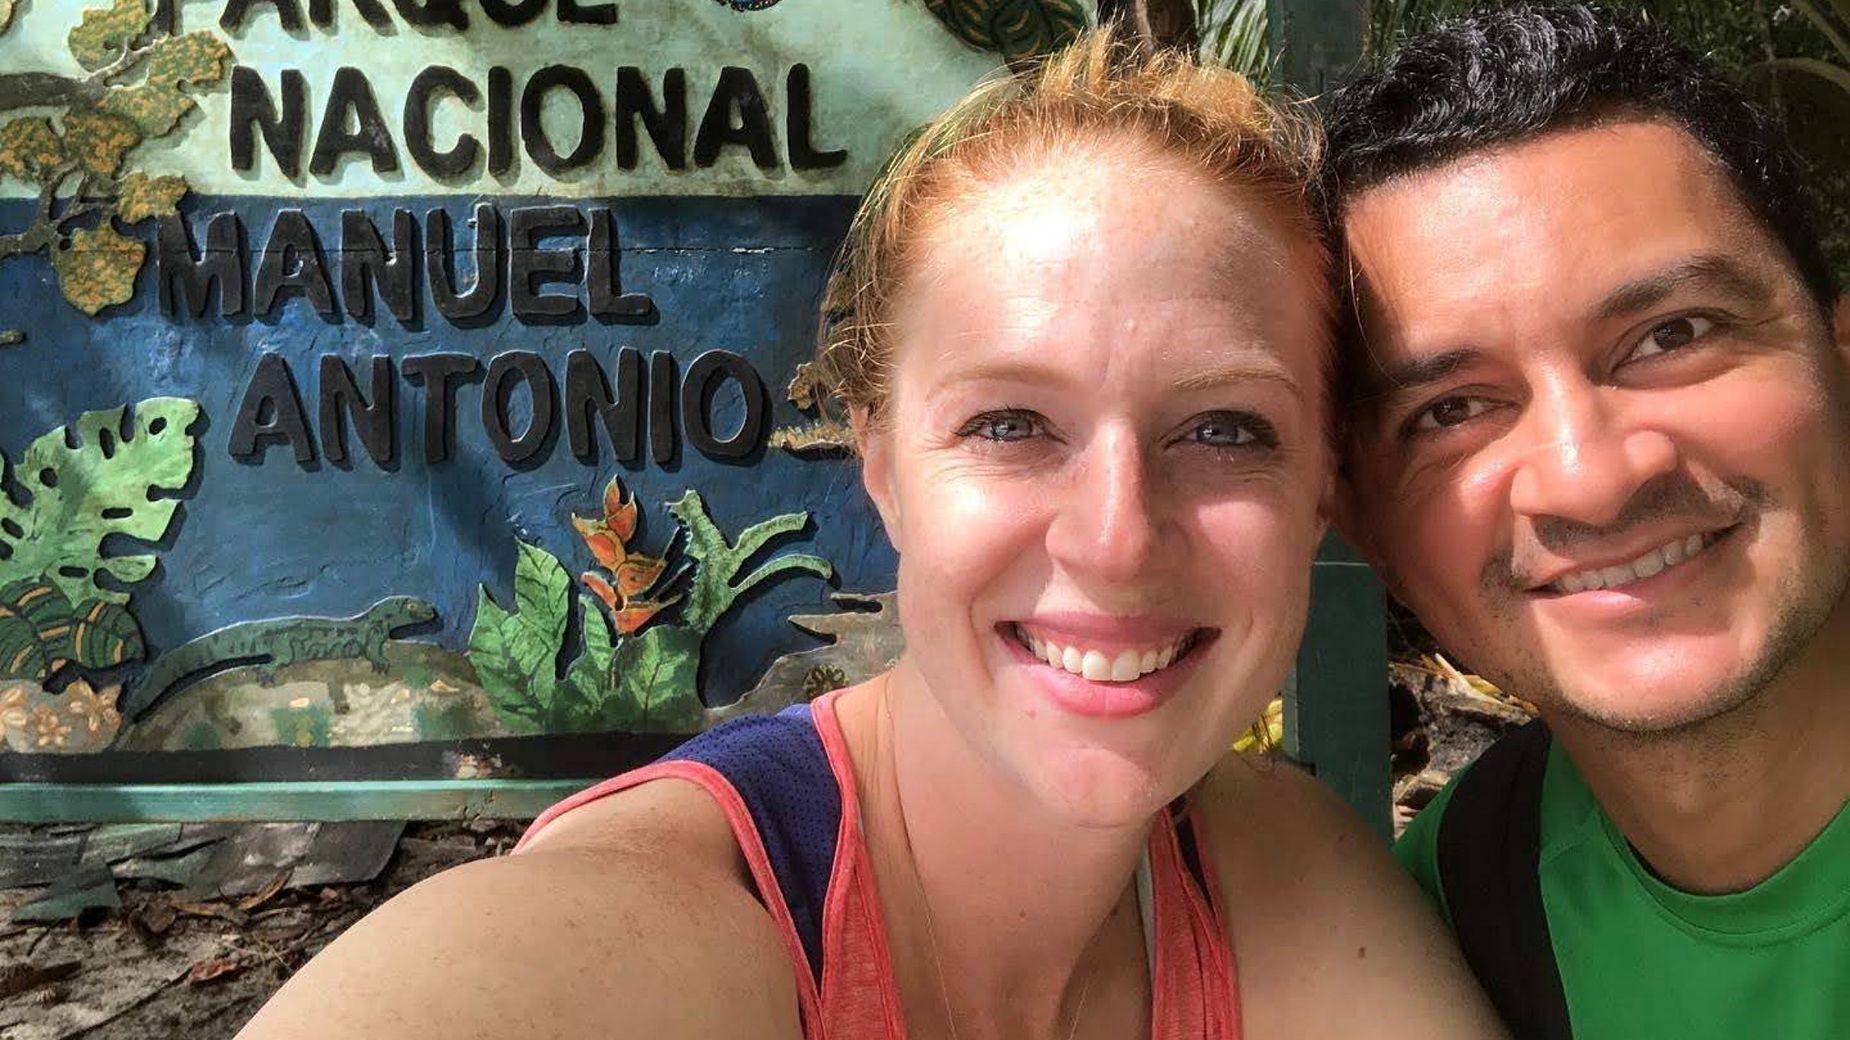 American Laura befriended fellow traveler Adrian, from Costa Rica, while hiking the Inca Trail. Here's the couple a few years later at Manual Antonio National Park in Costa Rica.